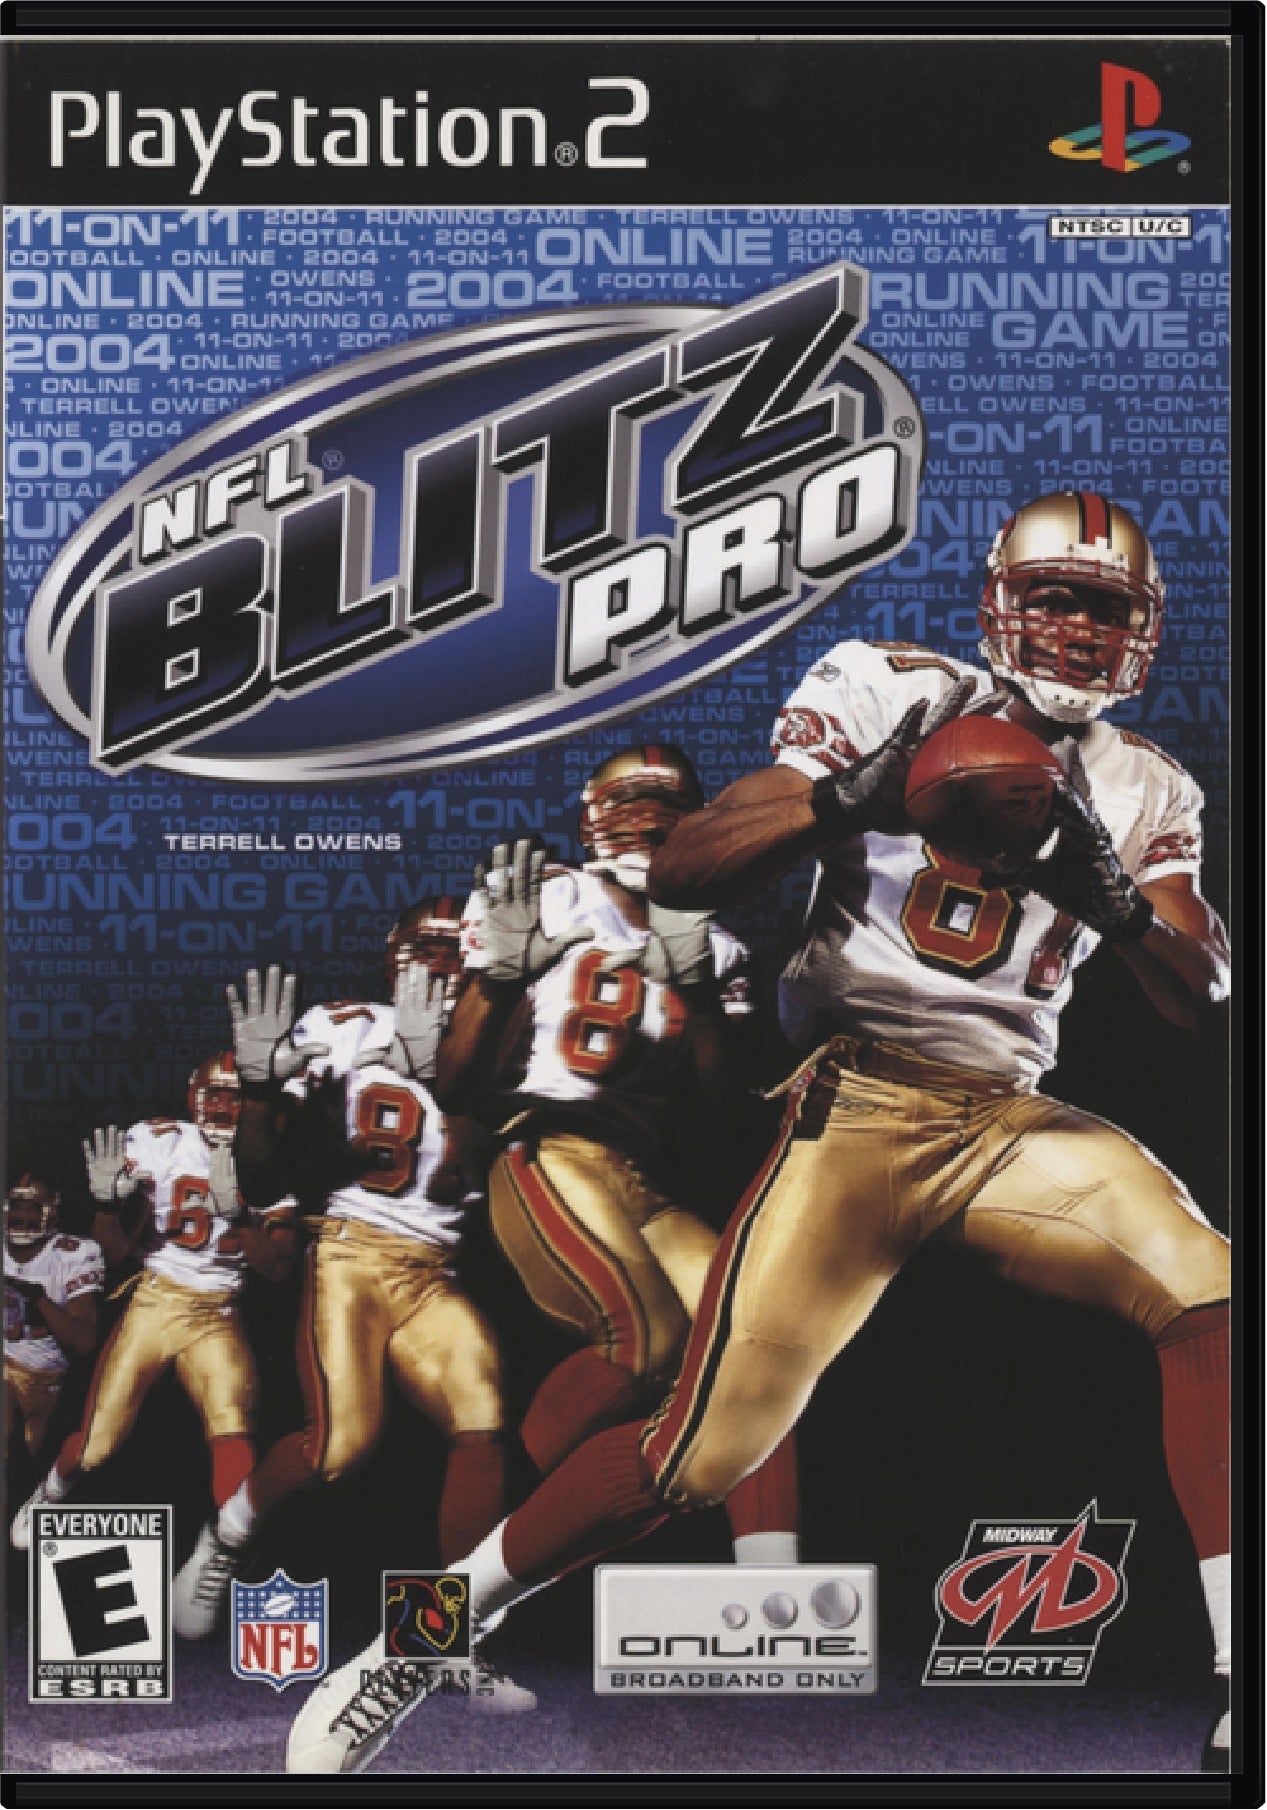 NFL Blitz Pro Cover Art and Product Photo